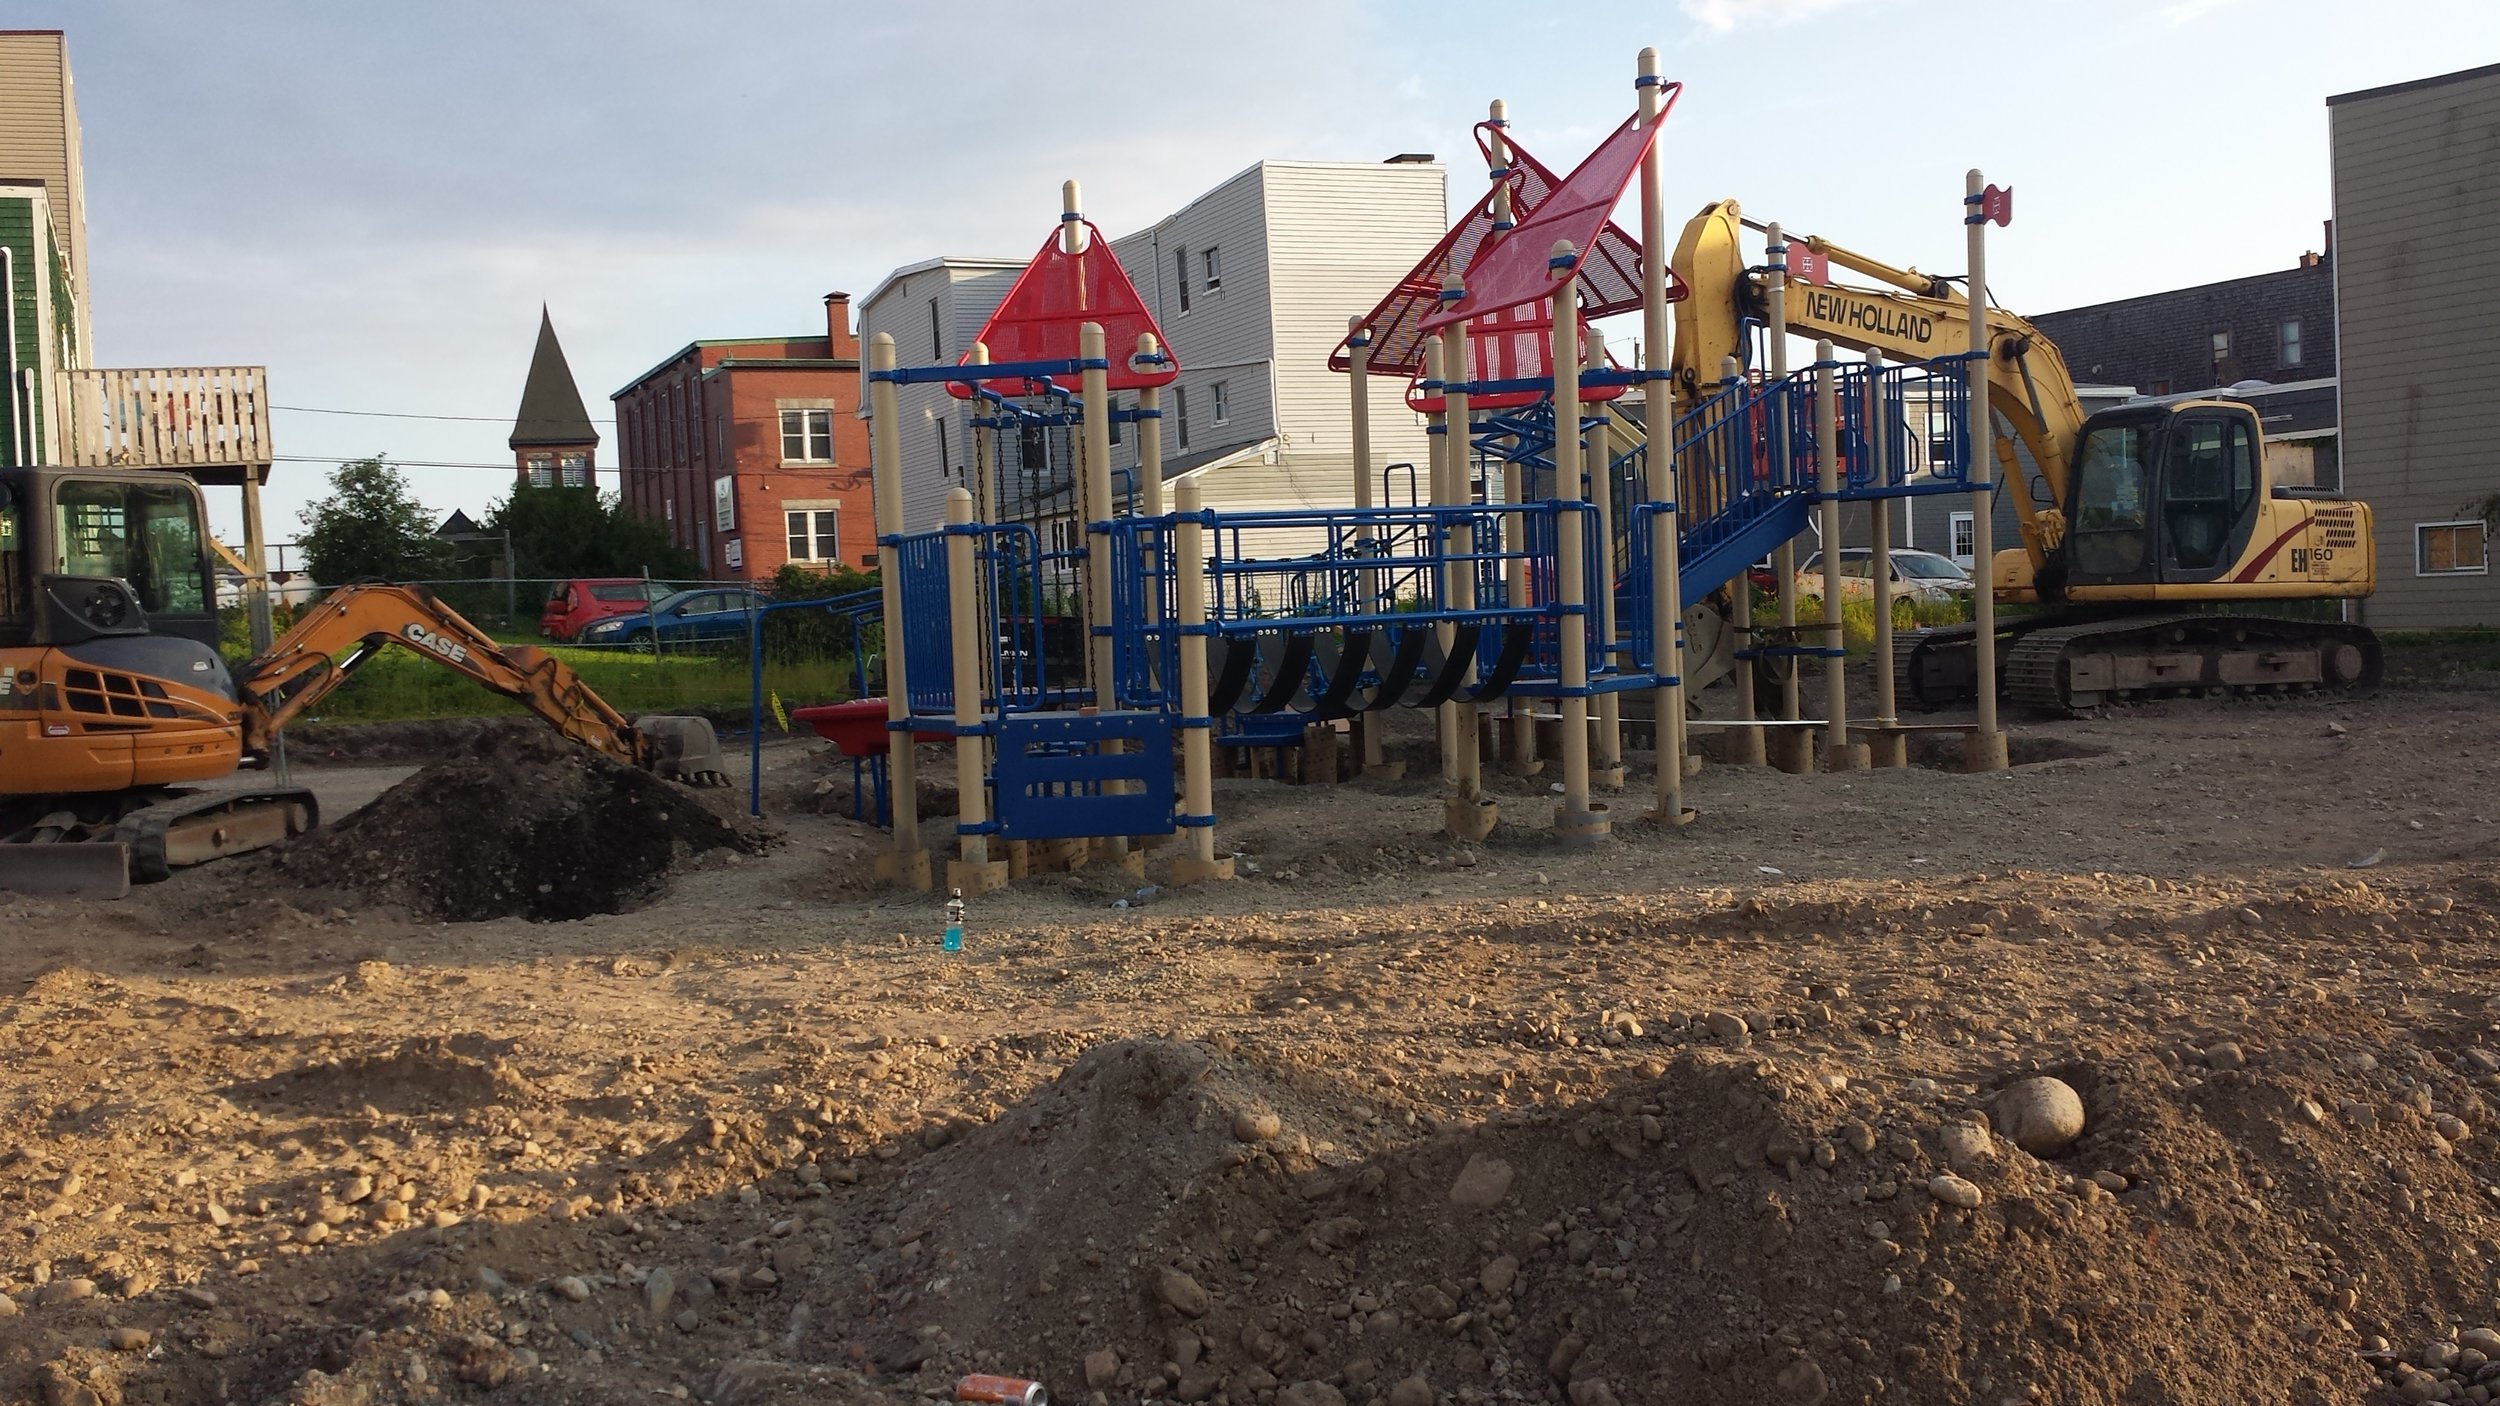 The playpark on July 18, 2017. You can see the steeple of the RiverCross Mission in the background.